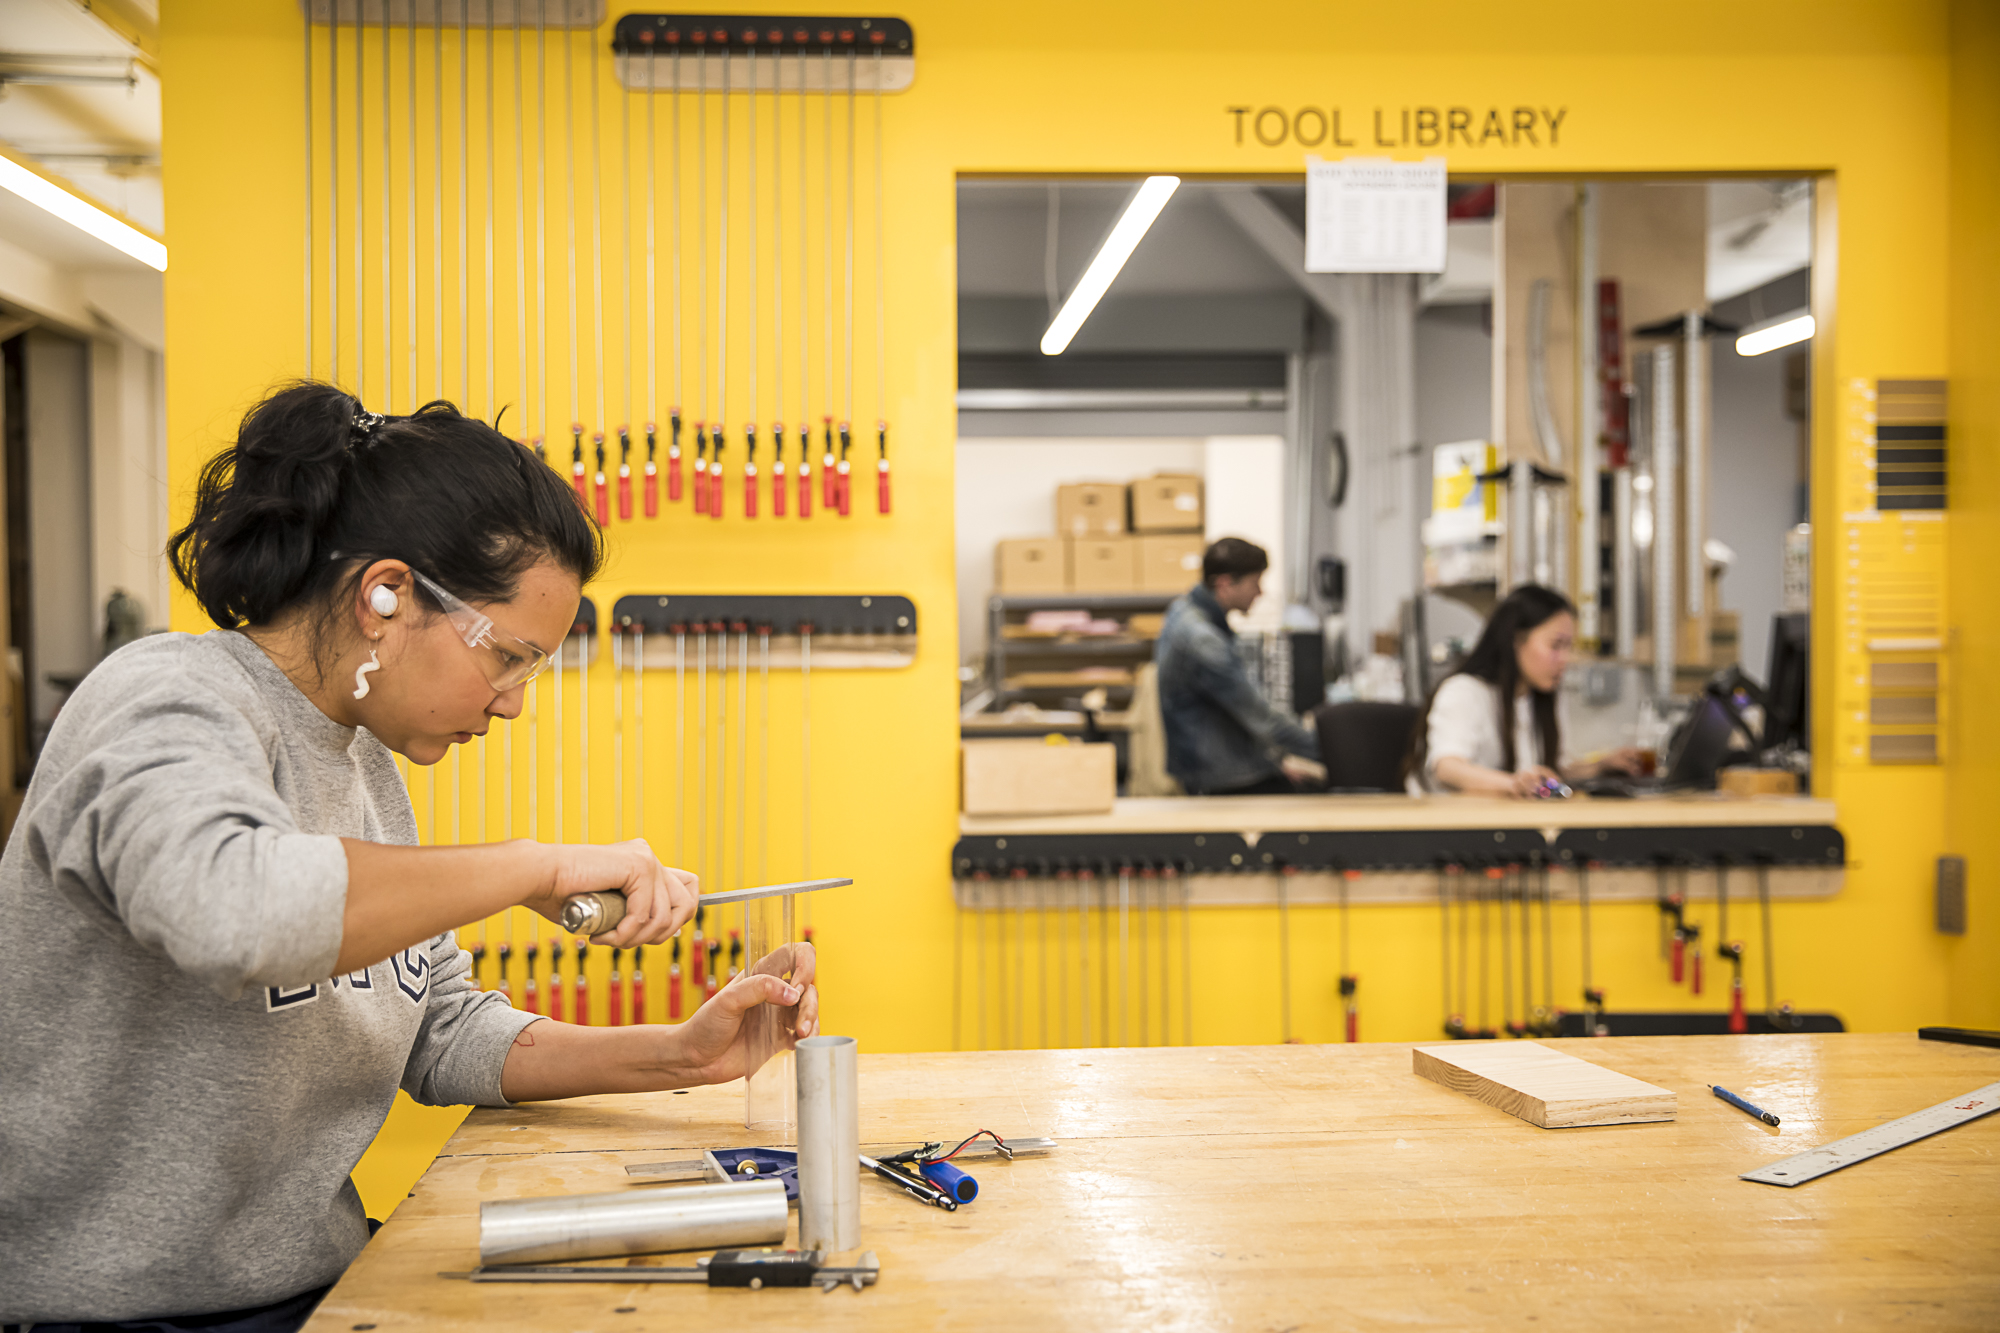 A student wearing safety goggles and earplugs at work in a workshop. Tools are around them. A Tool Library where they can check out tools is in the background.